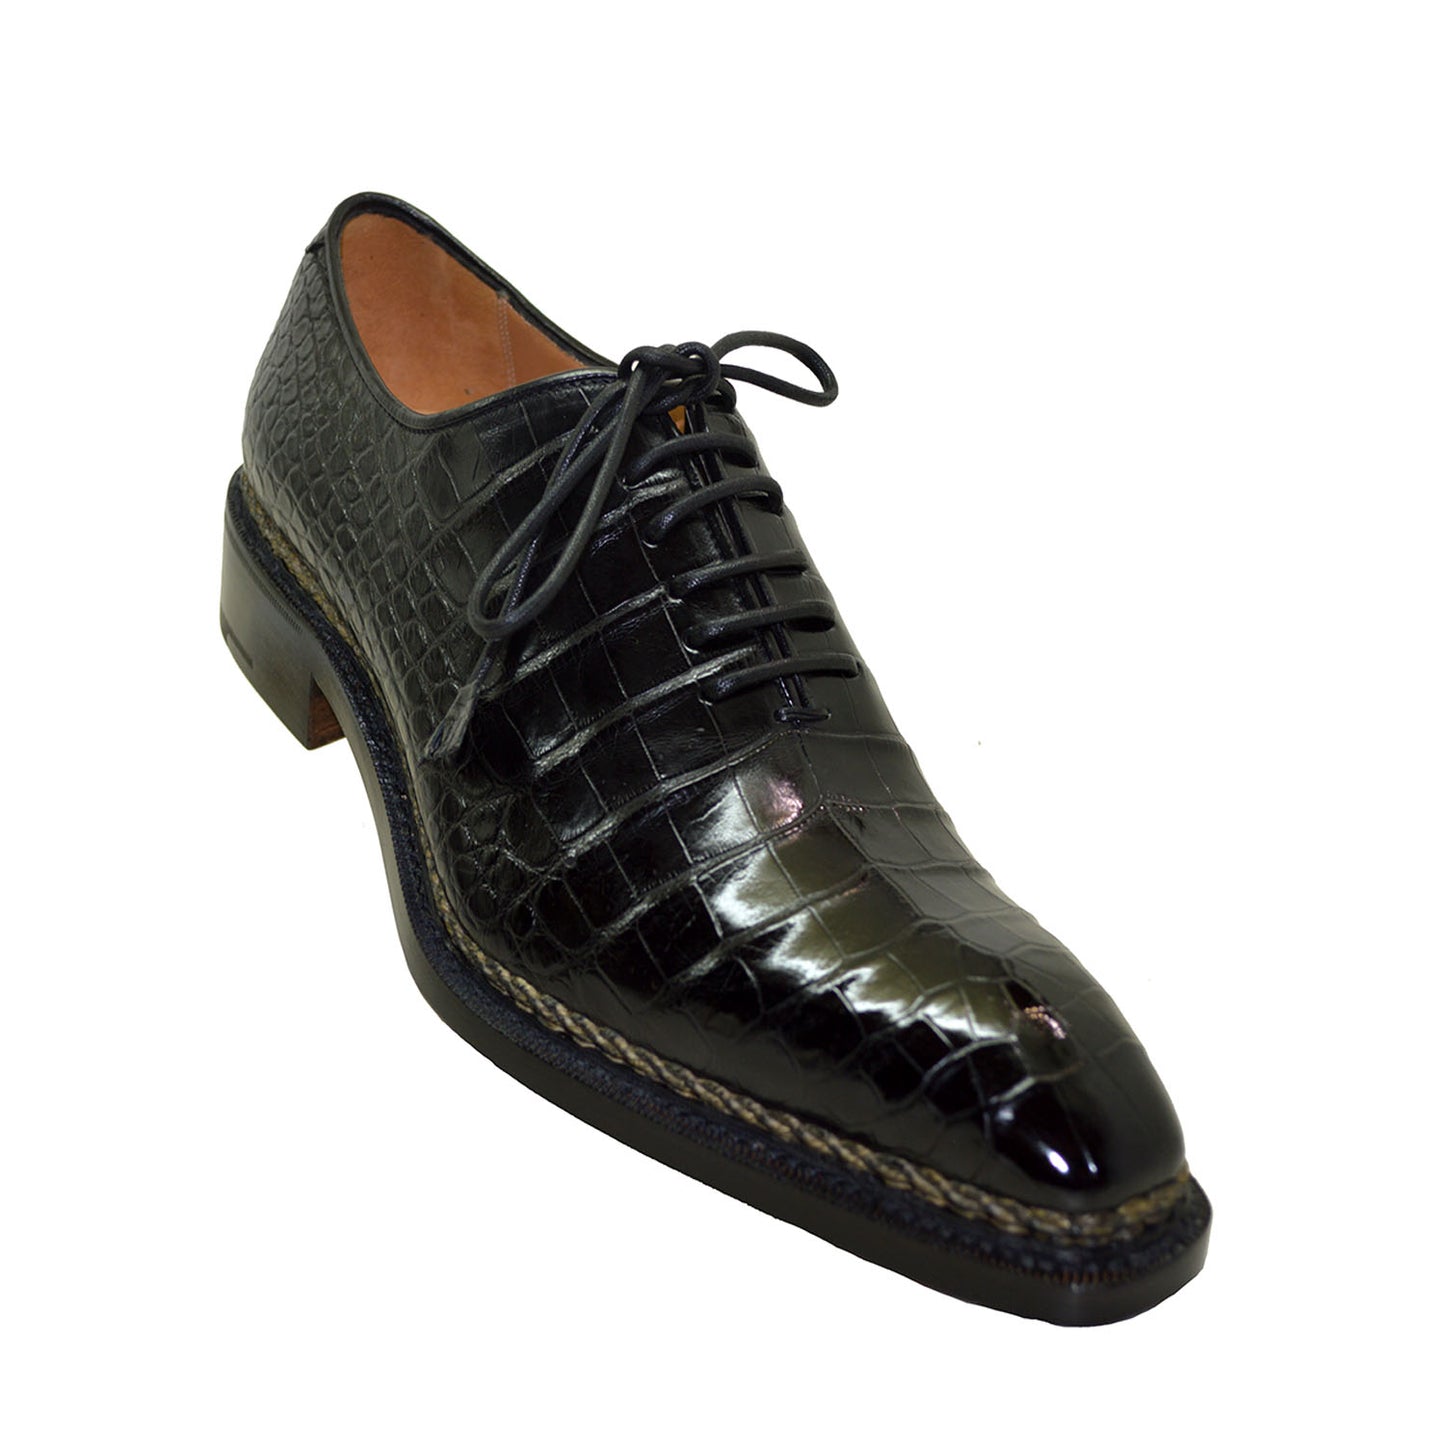 Caporicci 1400 Baby Alligator Lace Up